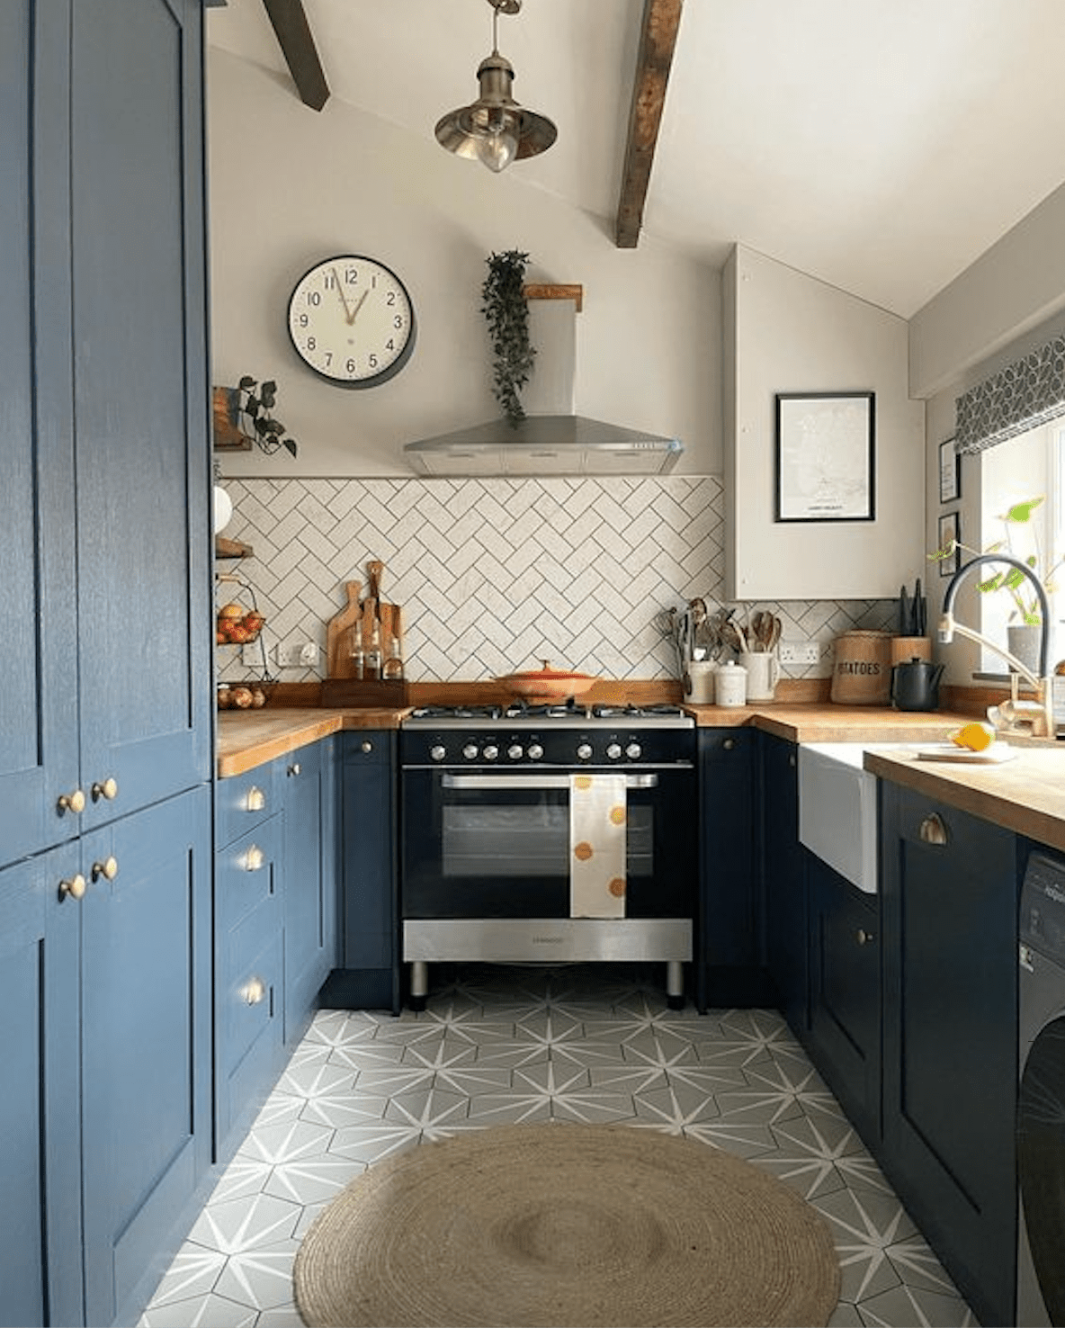 Small Kitchen Ideas That Make The Most of a Tight Space